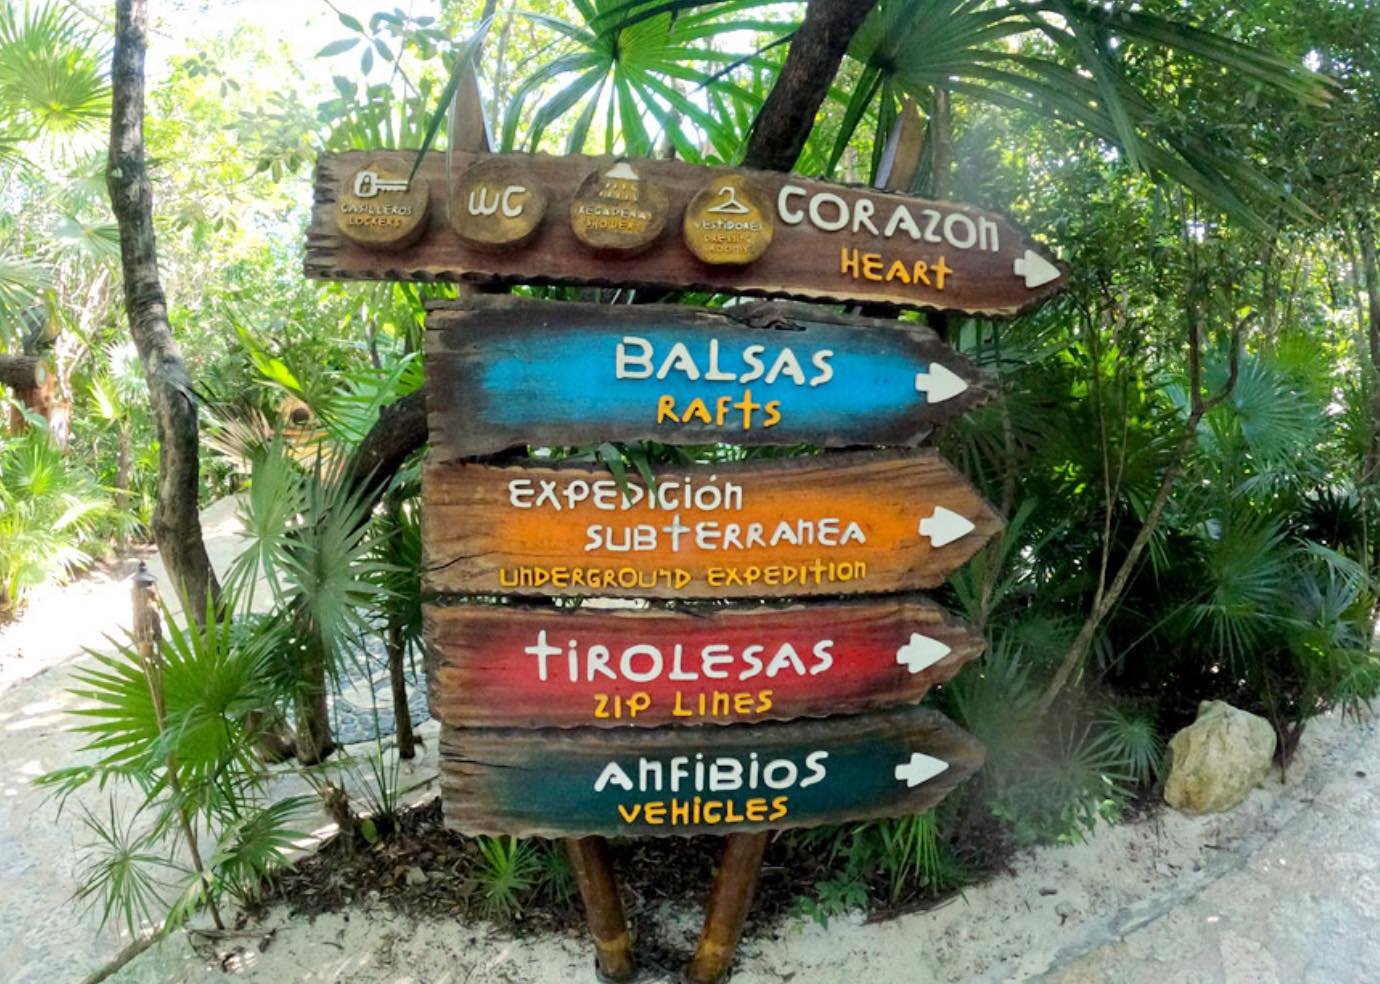 Carrying on with &ldquo;Everything Xcaret&rdquo; today we take a look at Xplor (Technically pronounced &ldquo;ish-plor&rdquo; however most will just pronounce it Explore)

Xplor Park in Riviera Maya is a thrilling adventure destination nestled in the